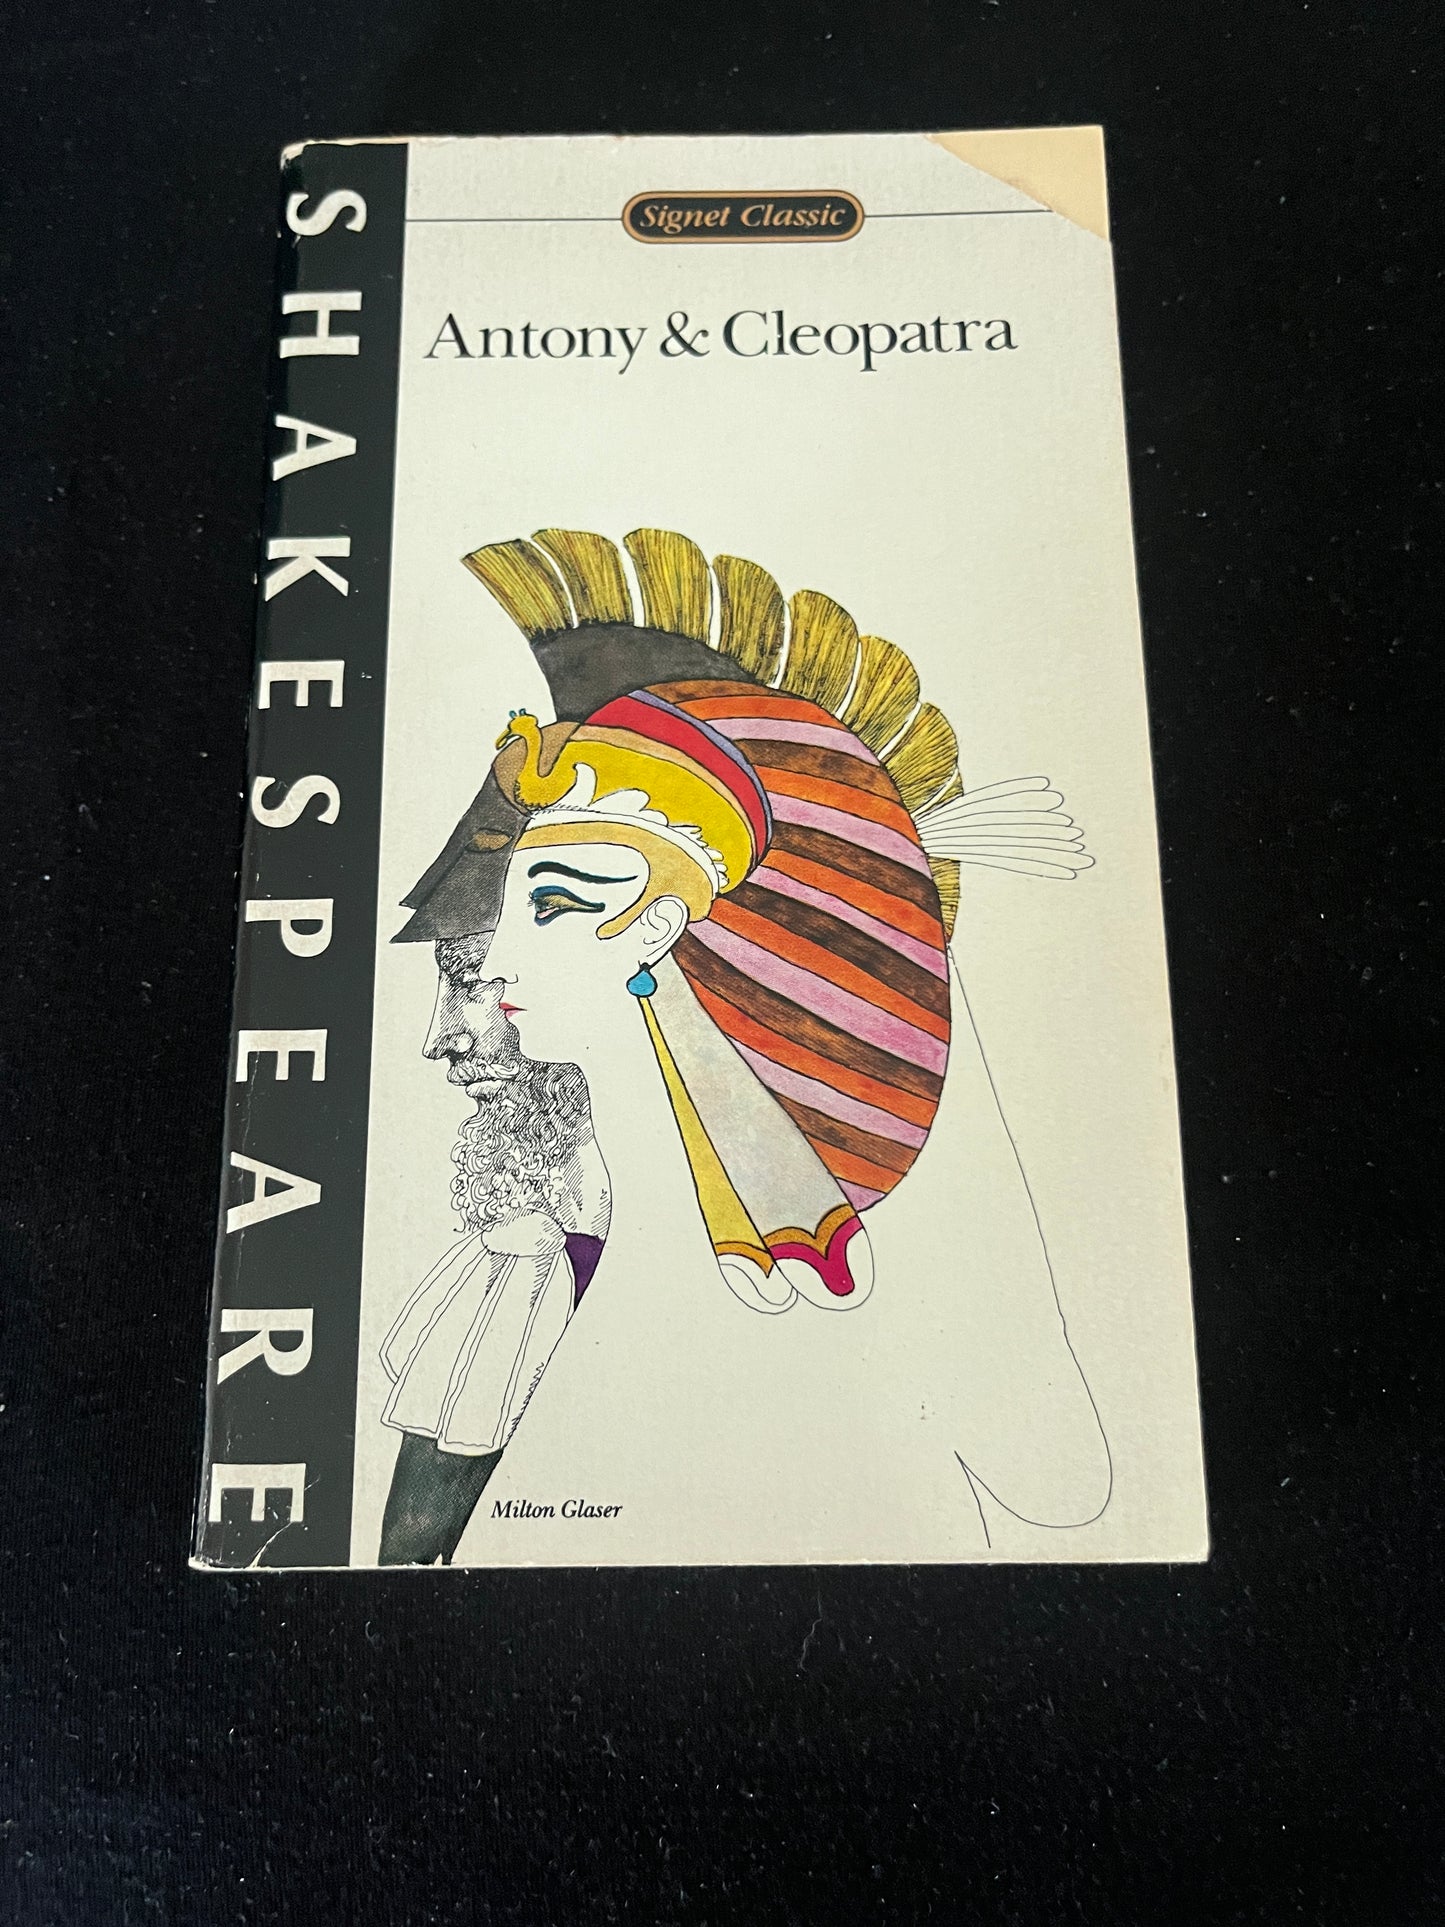 ANTHONY & CLEOPATRA by William Shakespeare